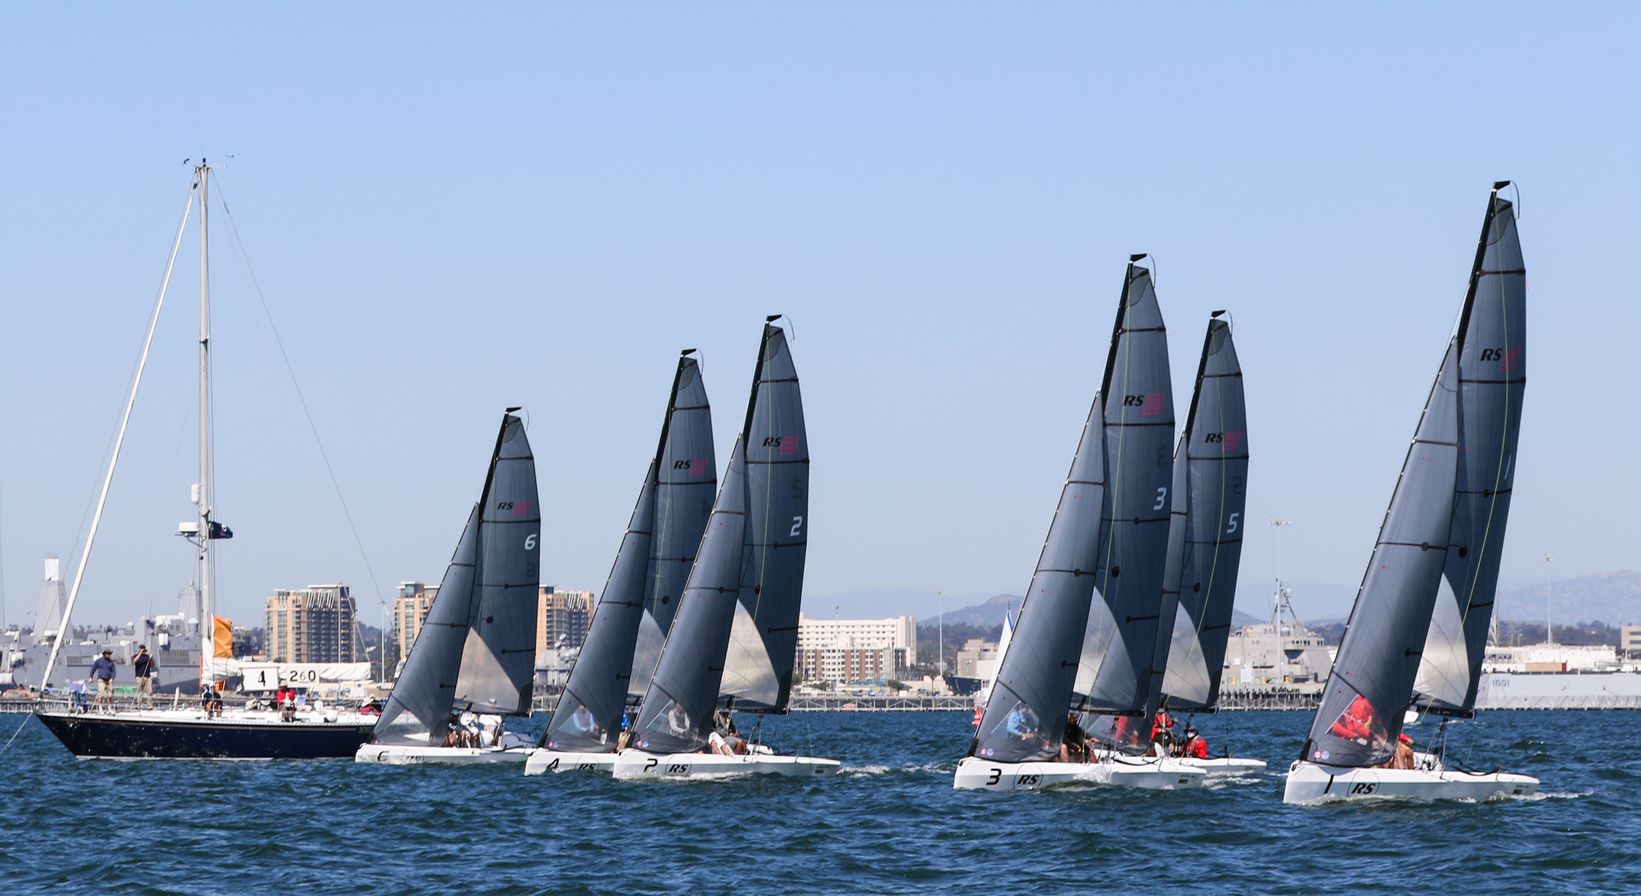 RS21's At the start line for the NOOD events